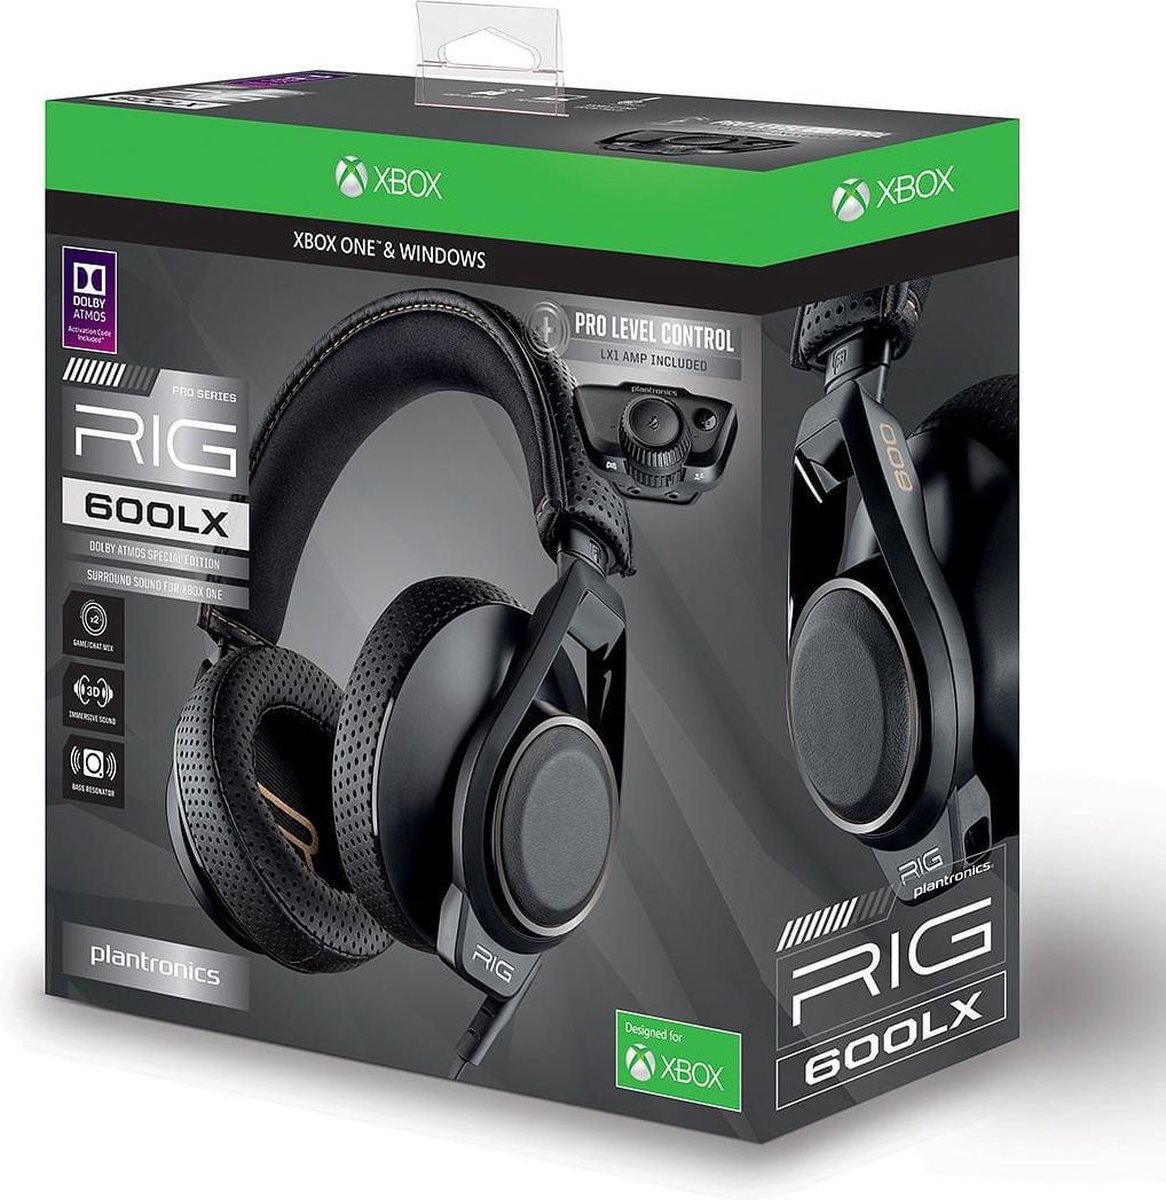 Plantronics RIG 600LX Dolby Atmos Gaming Headset speciaal voor Xbox One &  Windows PC | bol.com